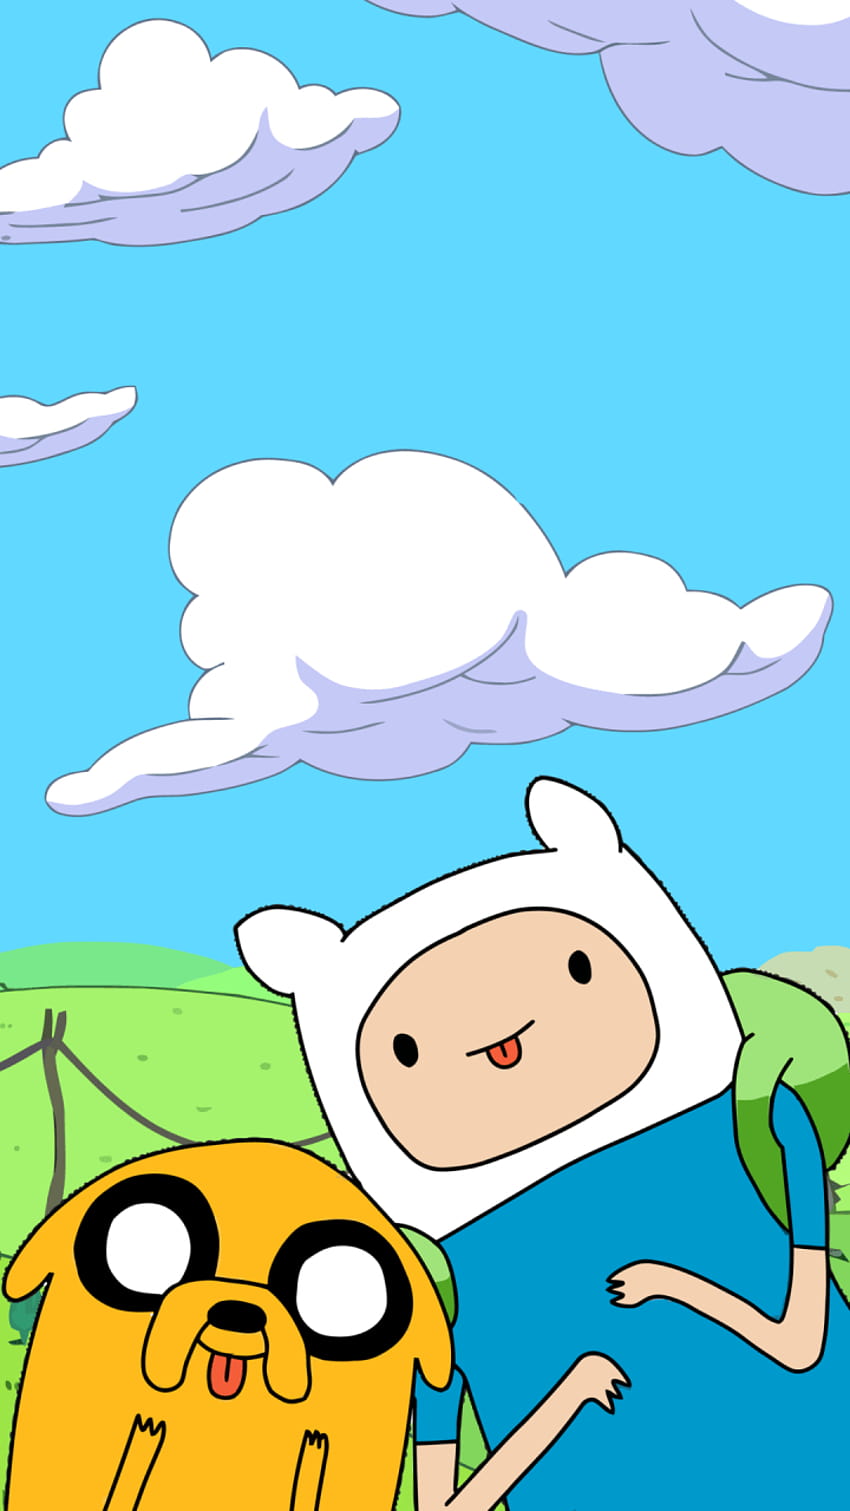 ADVENTURE TIME WALLPAPER FOR PHONE